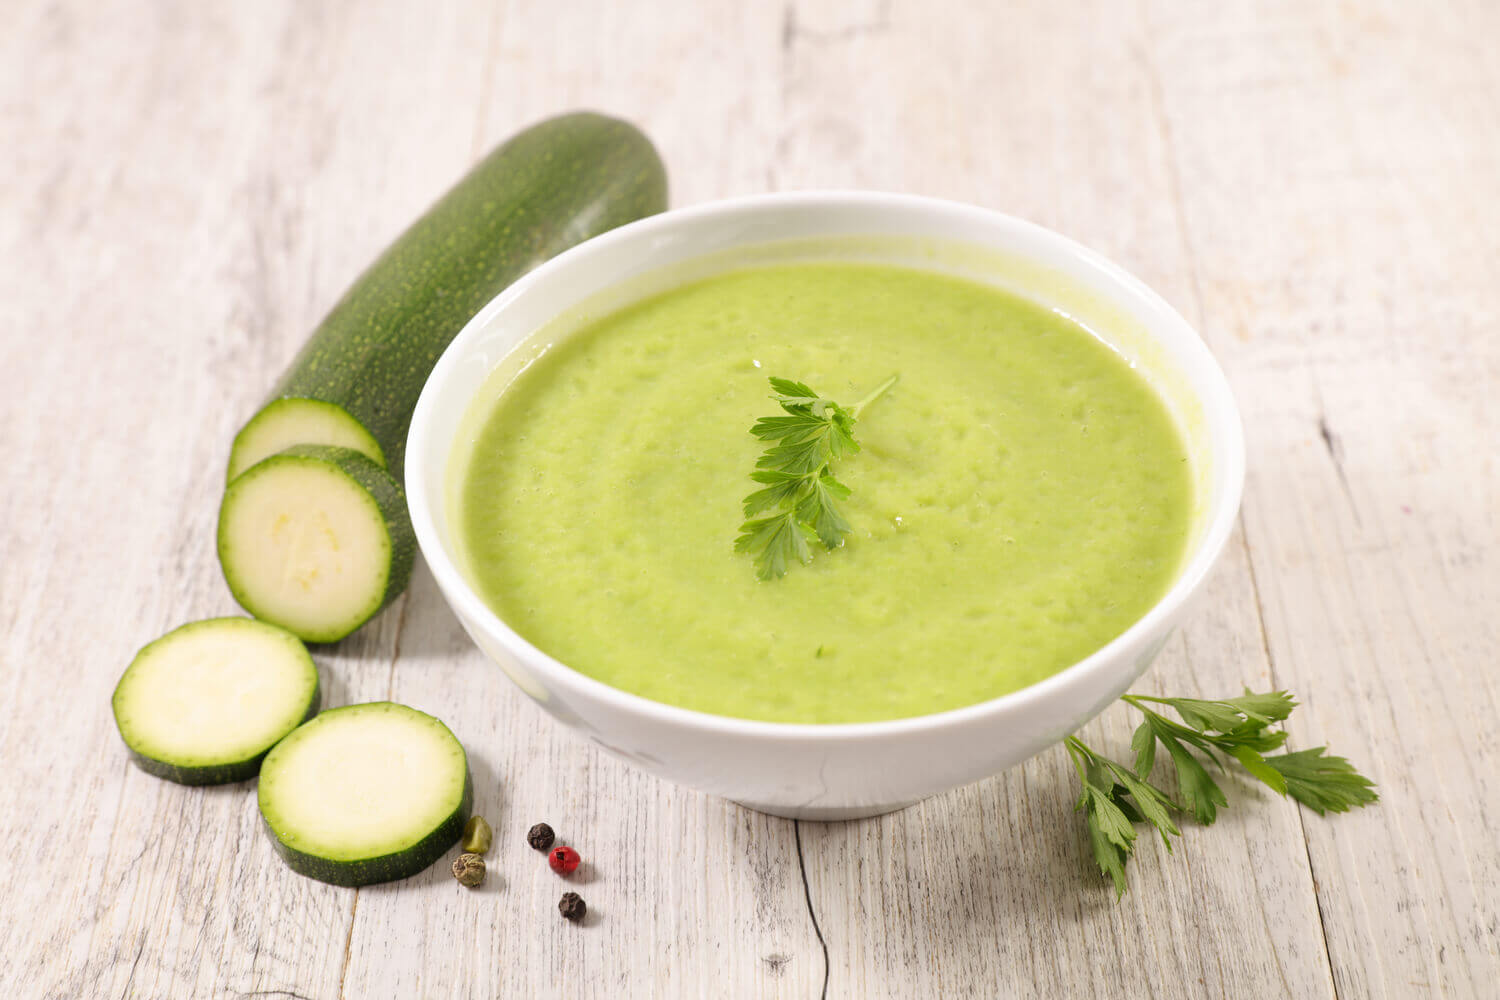 Tasty Zucchini Recipes For Babies